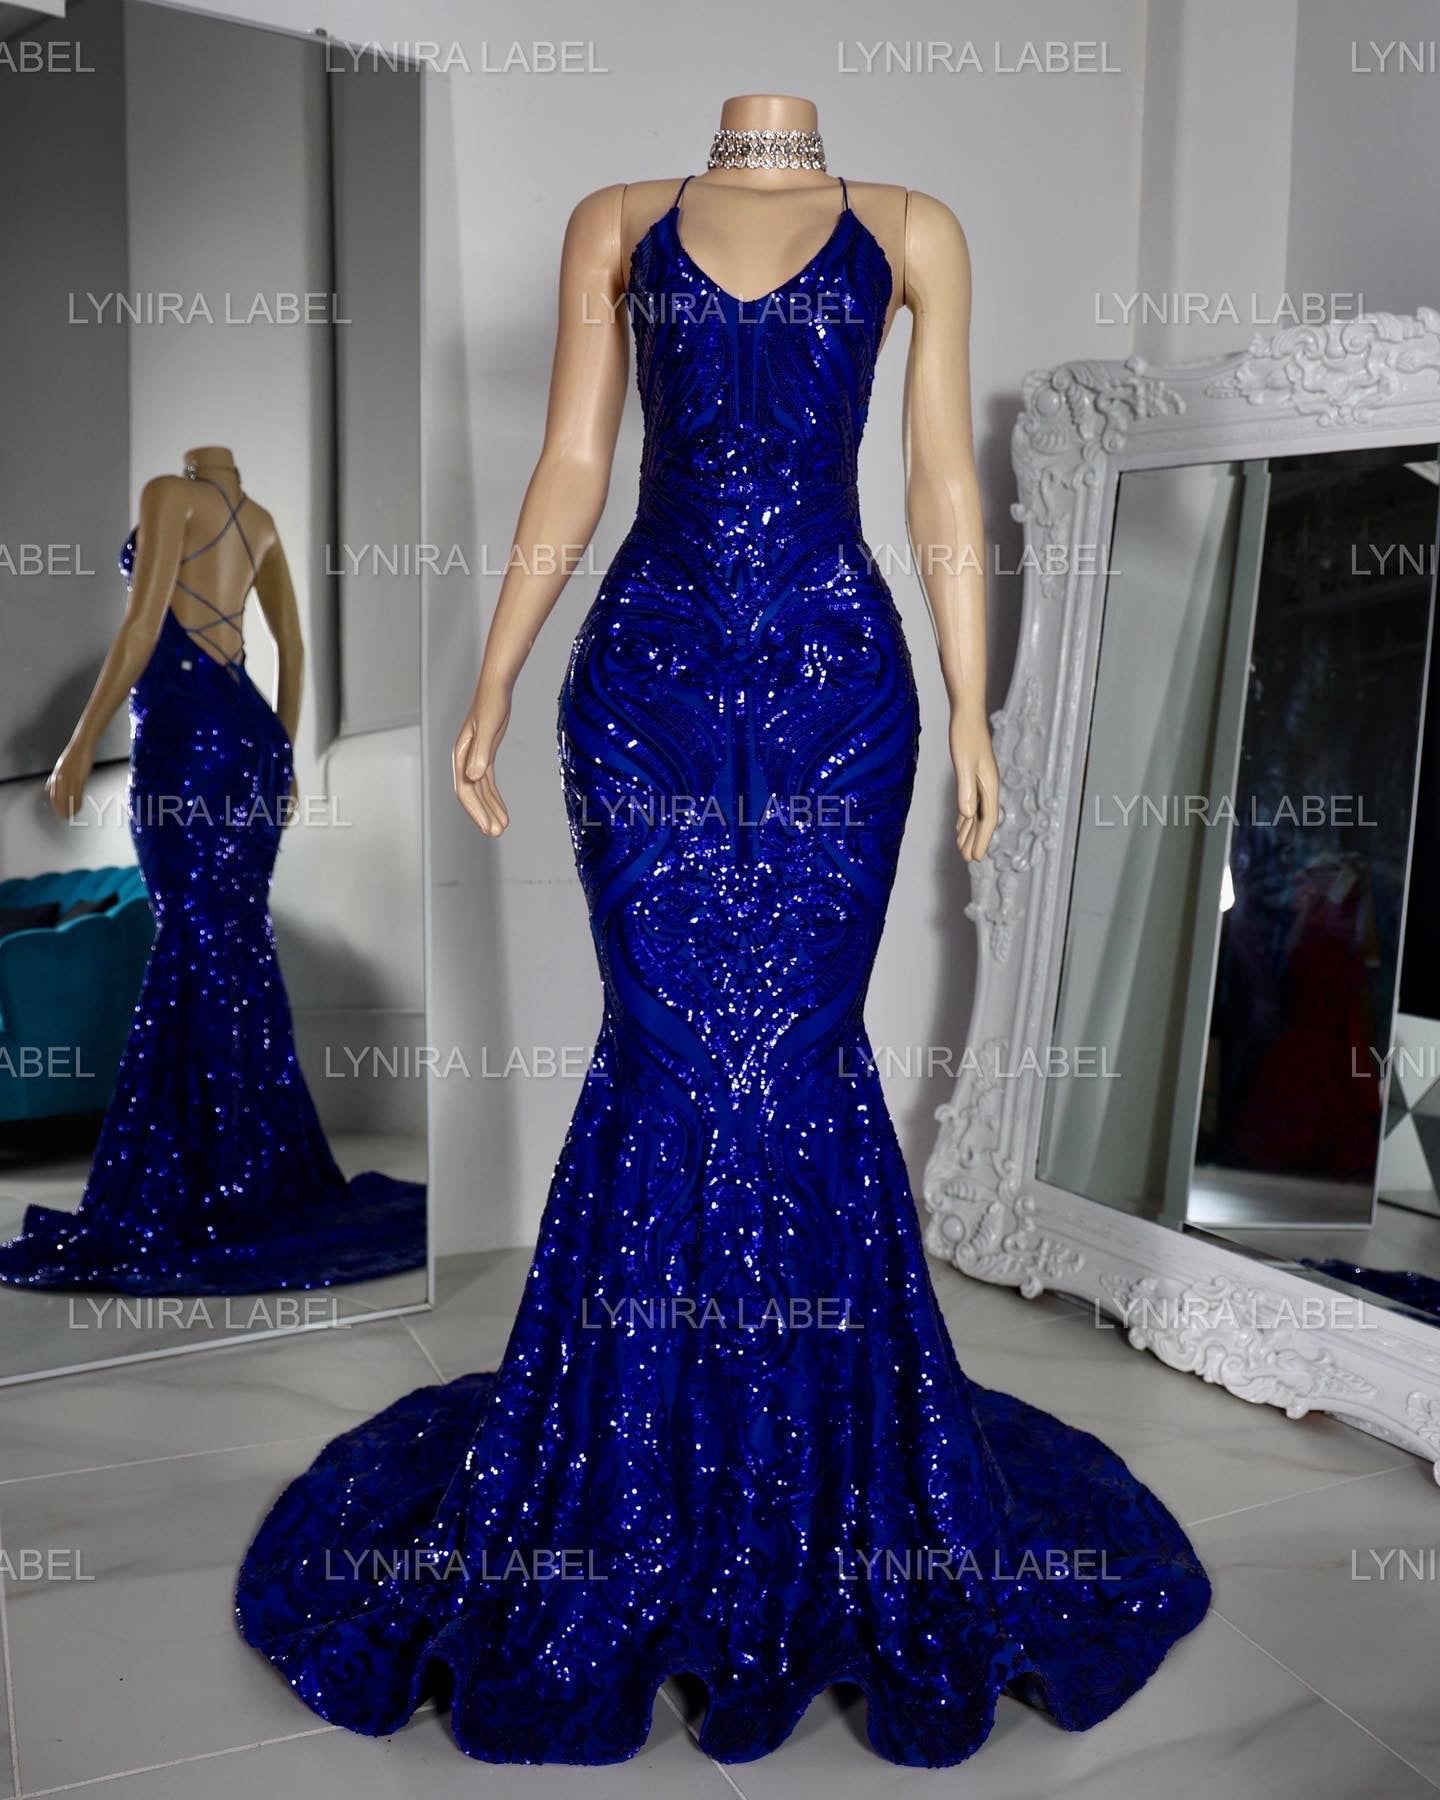 The AALIYAH Sequin Gown – Lynira Label